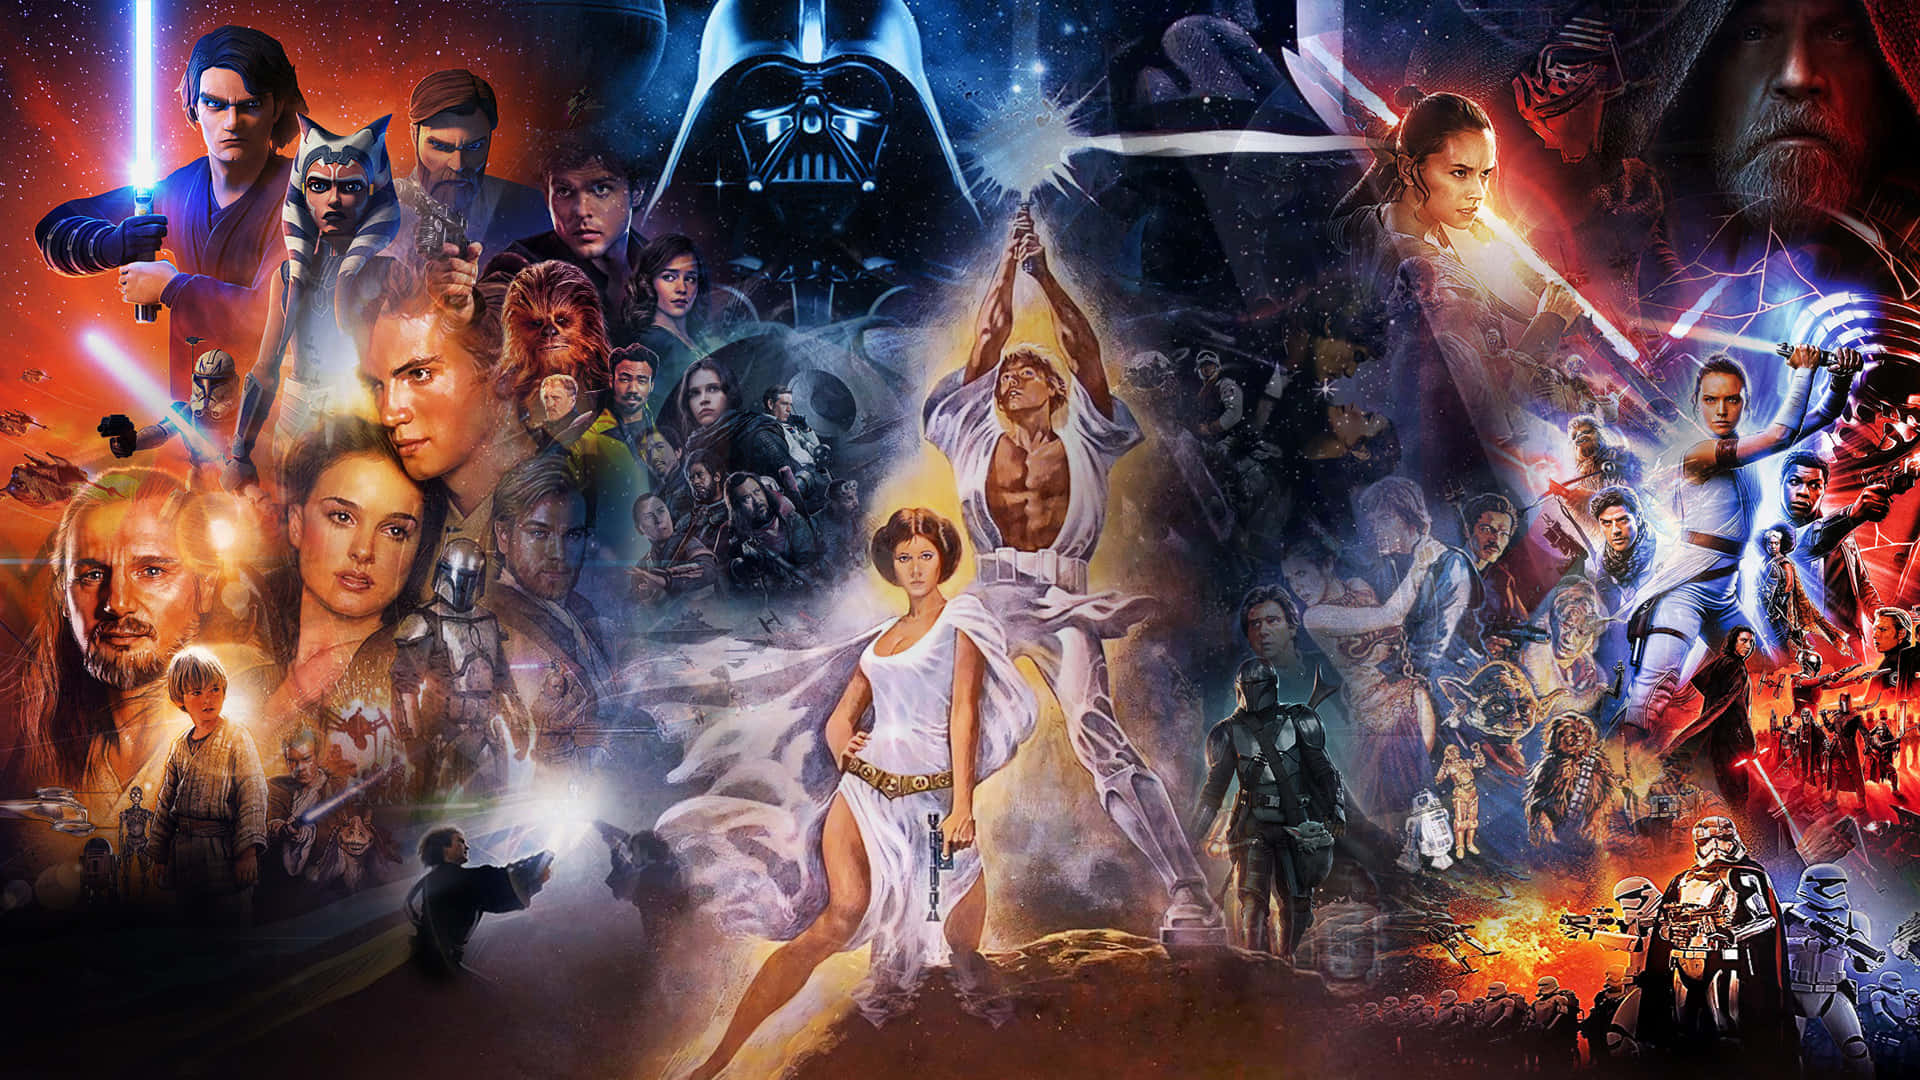 Star Wars 1977 To 2019 Characters Background